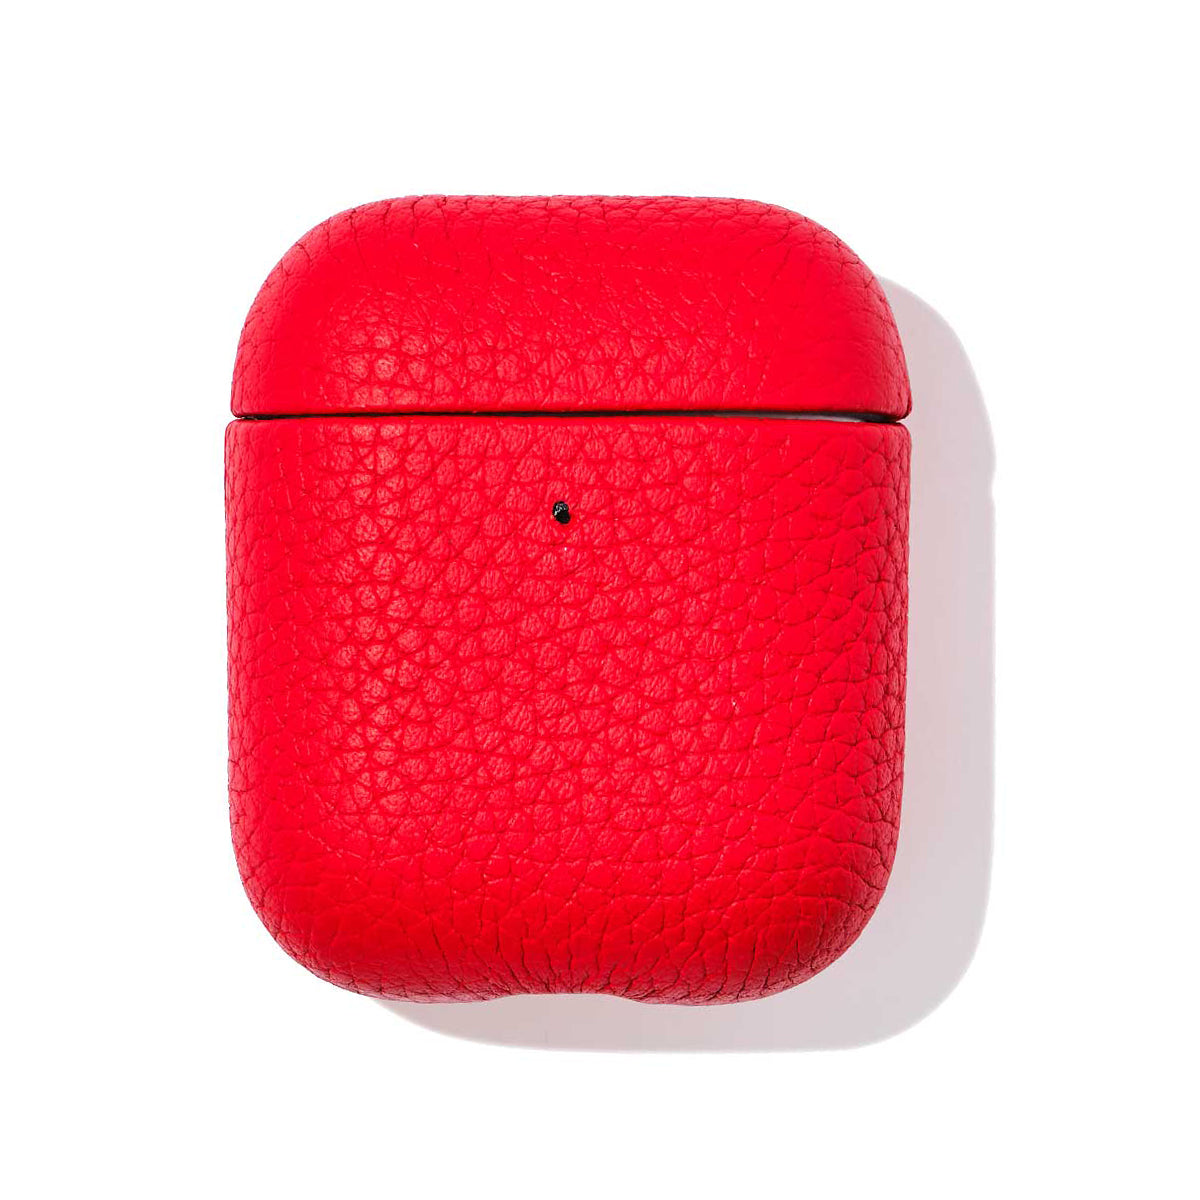 Custom AirPods Pro / Pro 2 Leather Case Personalized Monogram Color  Embossing Engraving – CairPods